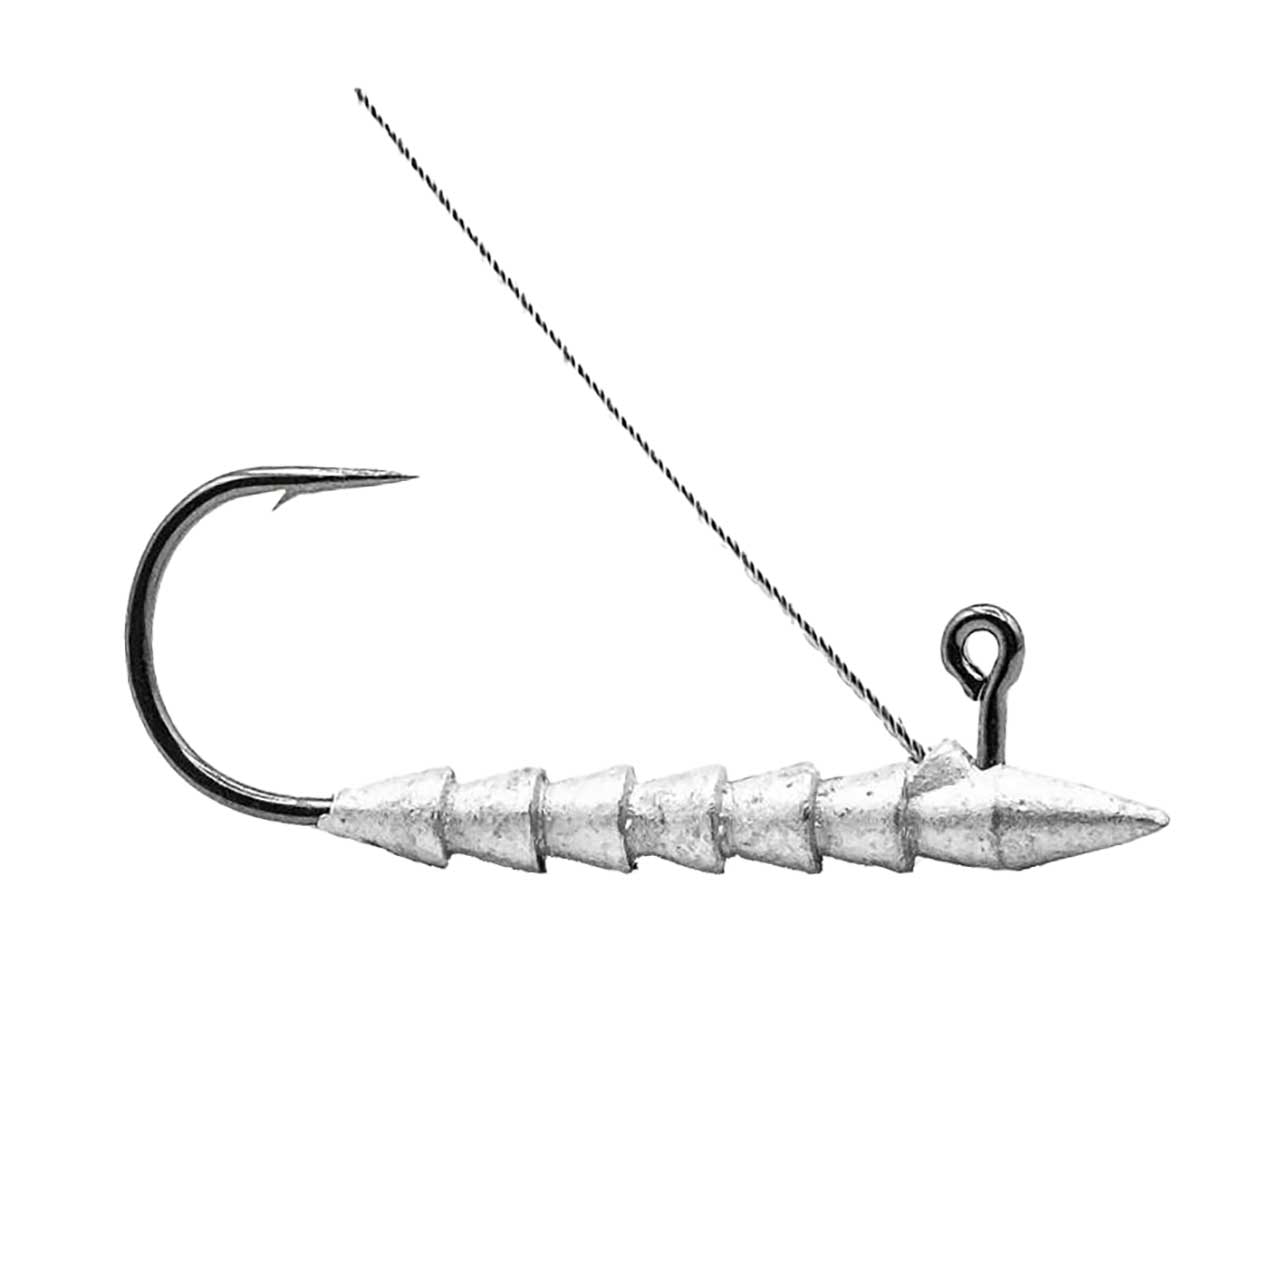 Core Tackle Weedless Hover Rig 4/0 / 3/16oz